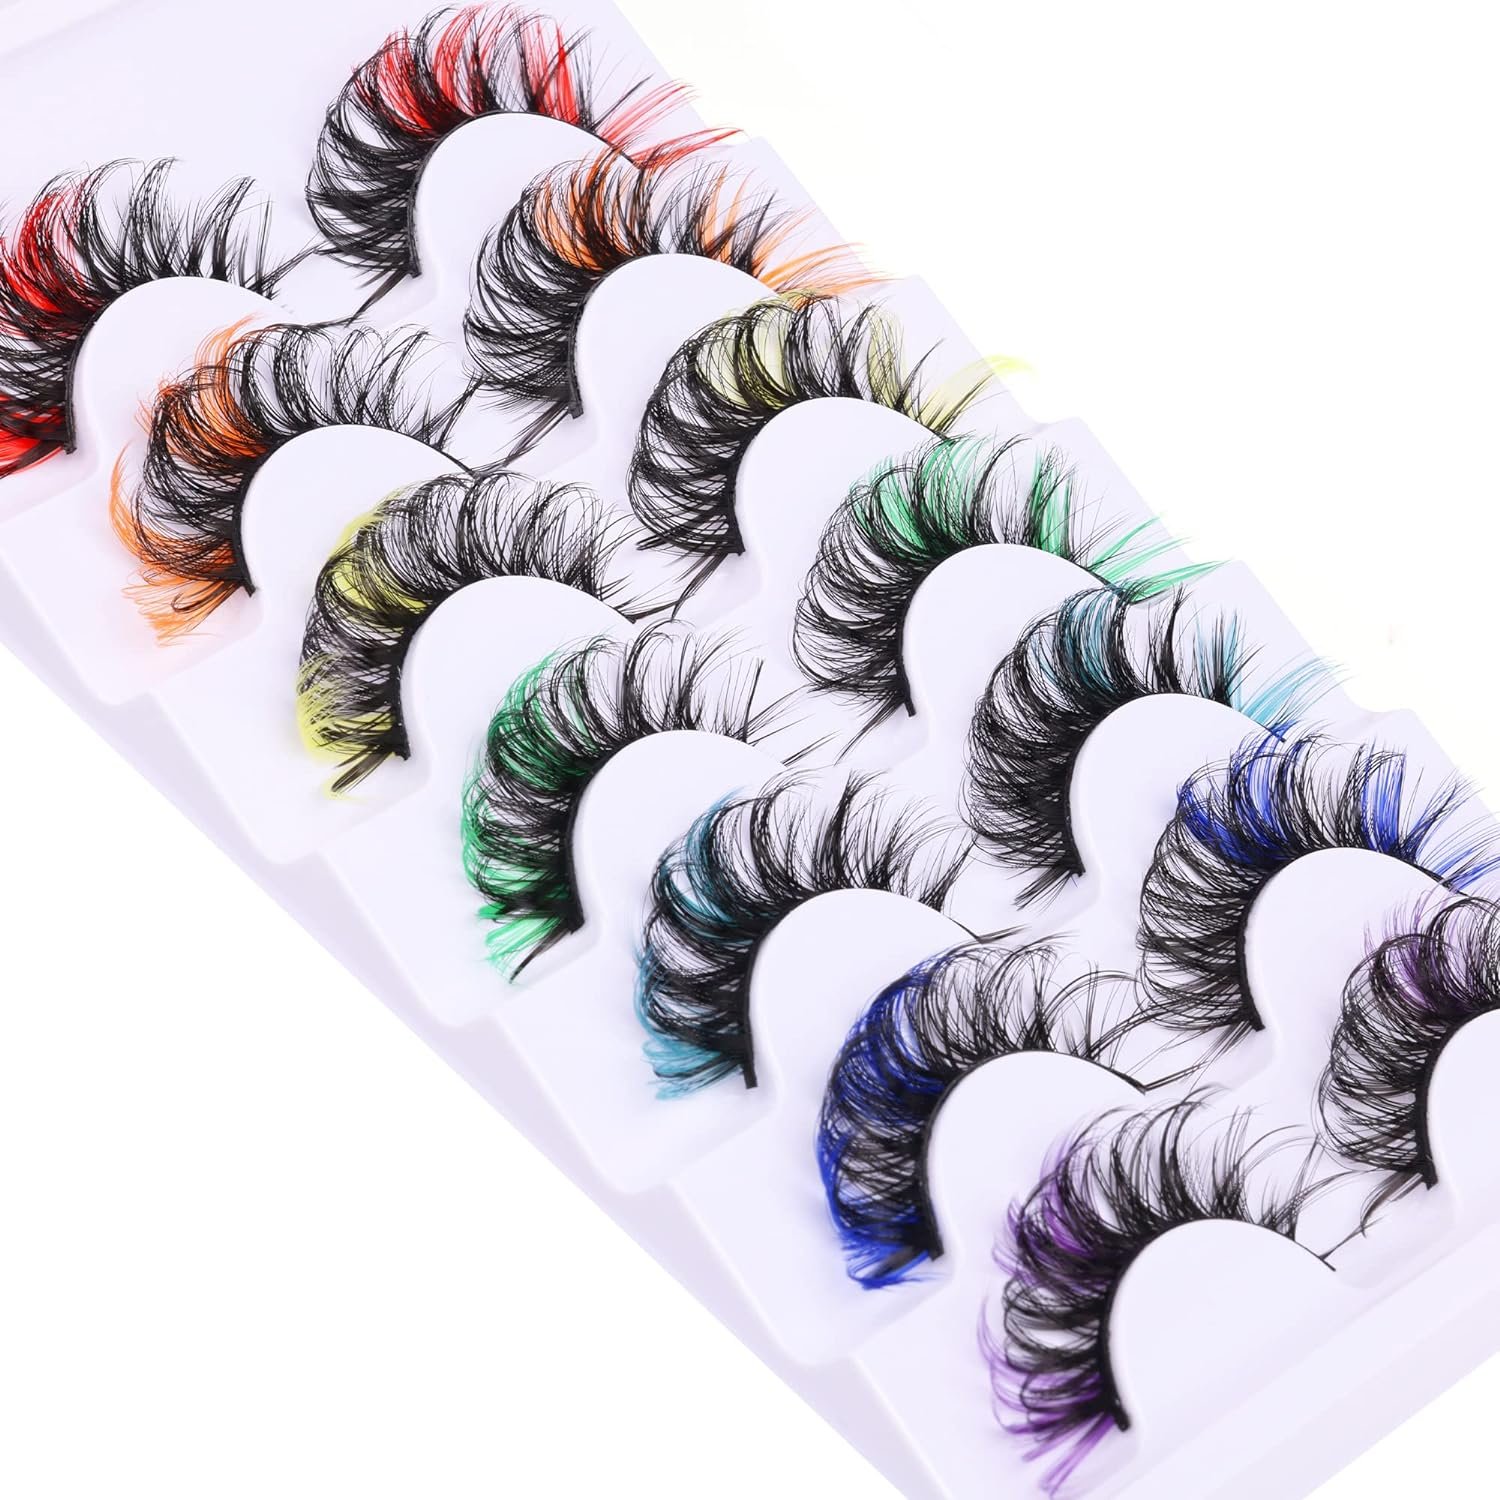 Colored Eyelashes Mink Lashes with Color Fluffy Natural Wispy Strip Eye Lashes 5D Volume False Eyelashes Pack 7 Pairs Cosply Rainbow Colors Fake Eyelashes by TNFVLONEINS .jpg